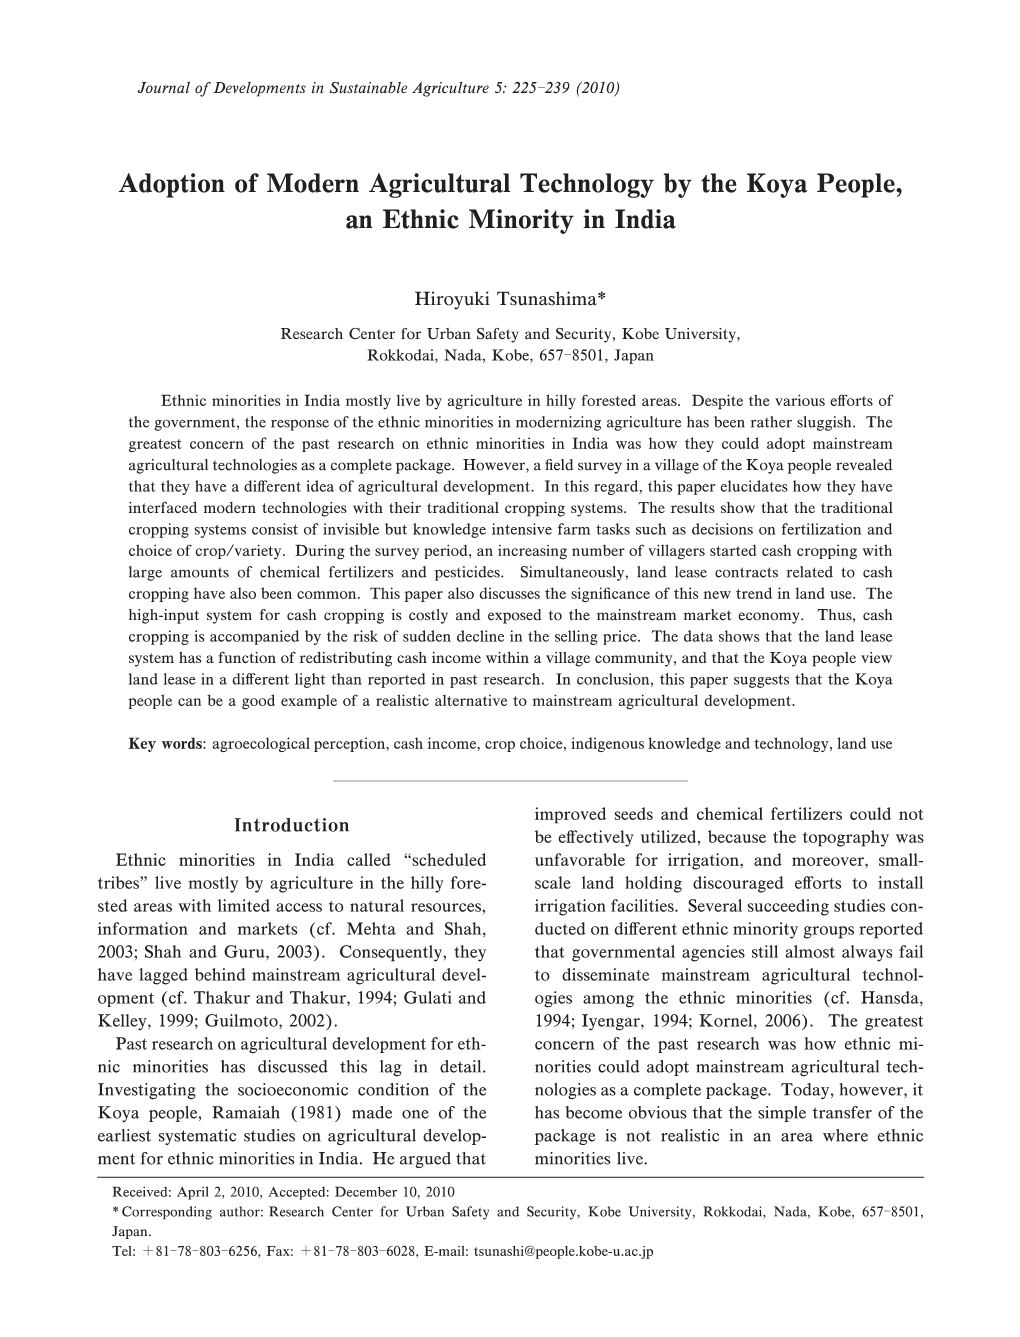 Adoption of Modern Agricultural Technology by the Koya People, an Ethnic Minority in India